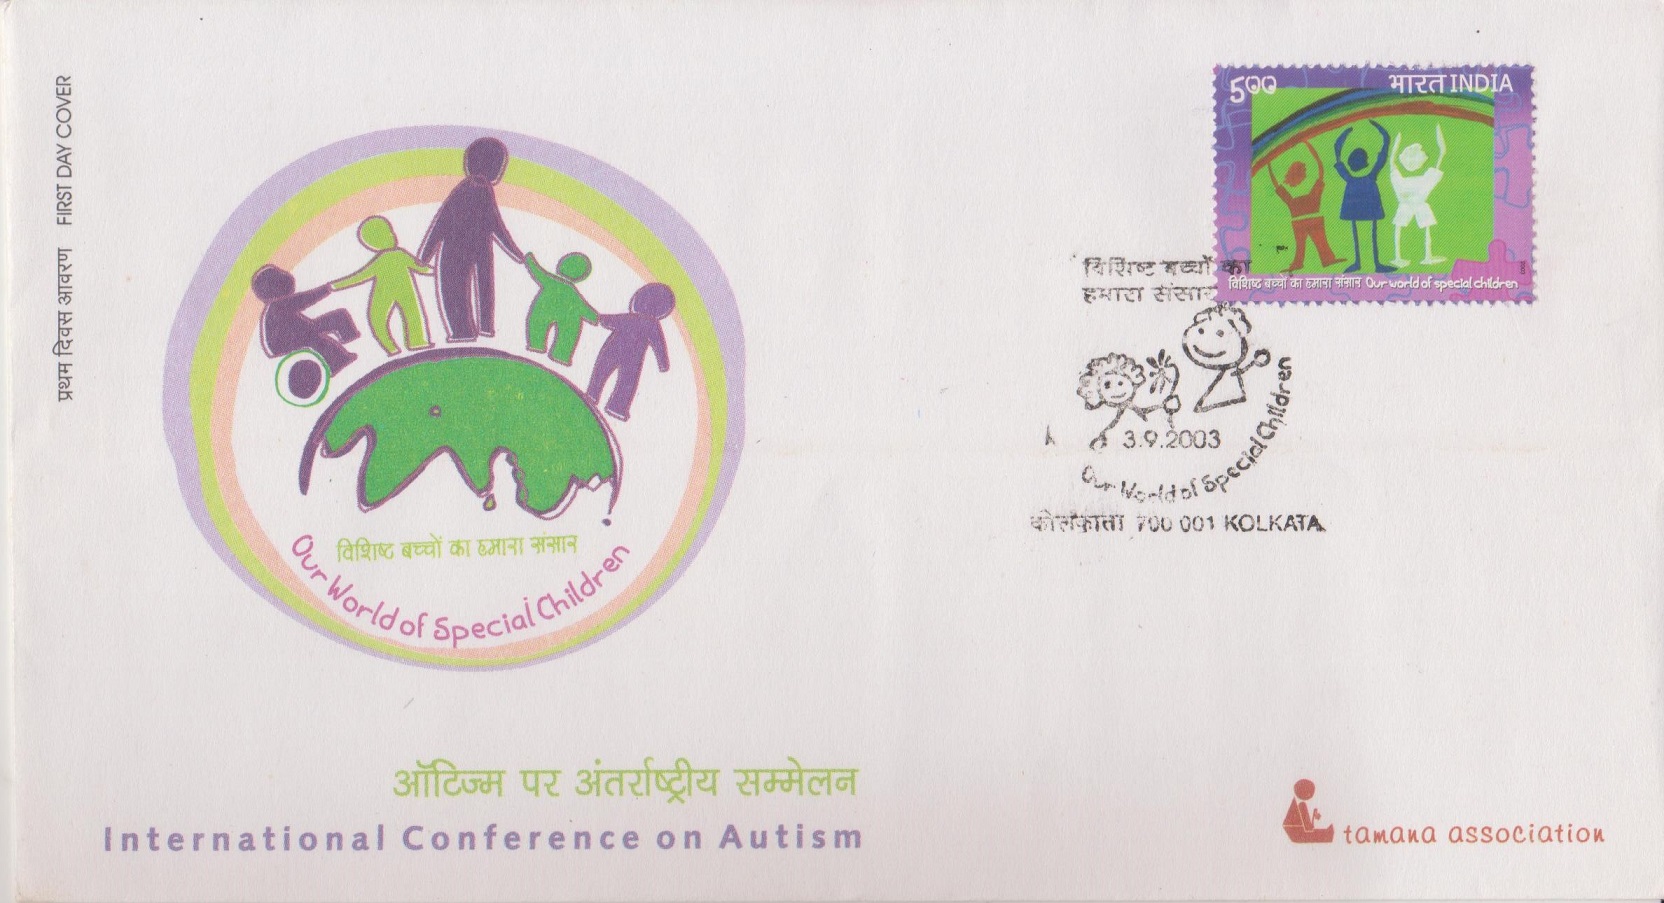 Our World of Special Children : Tamana Association